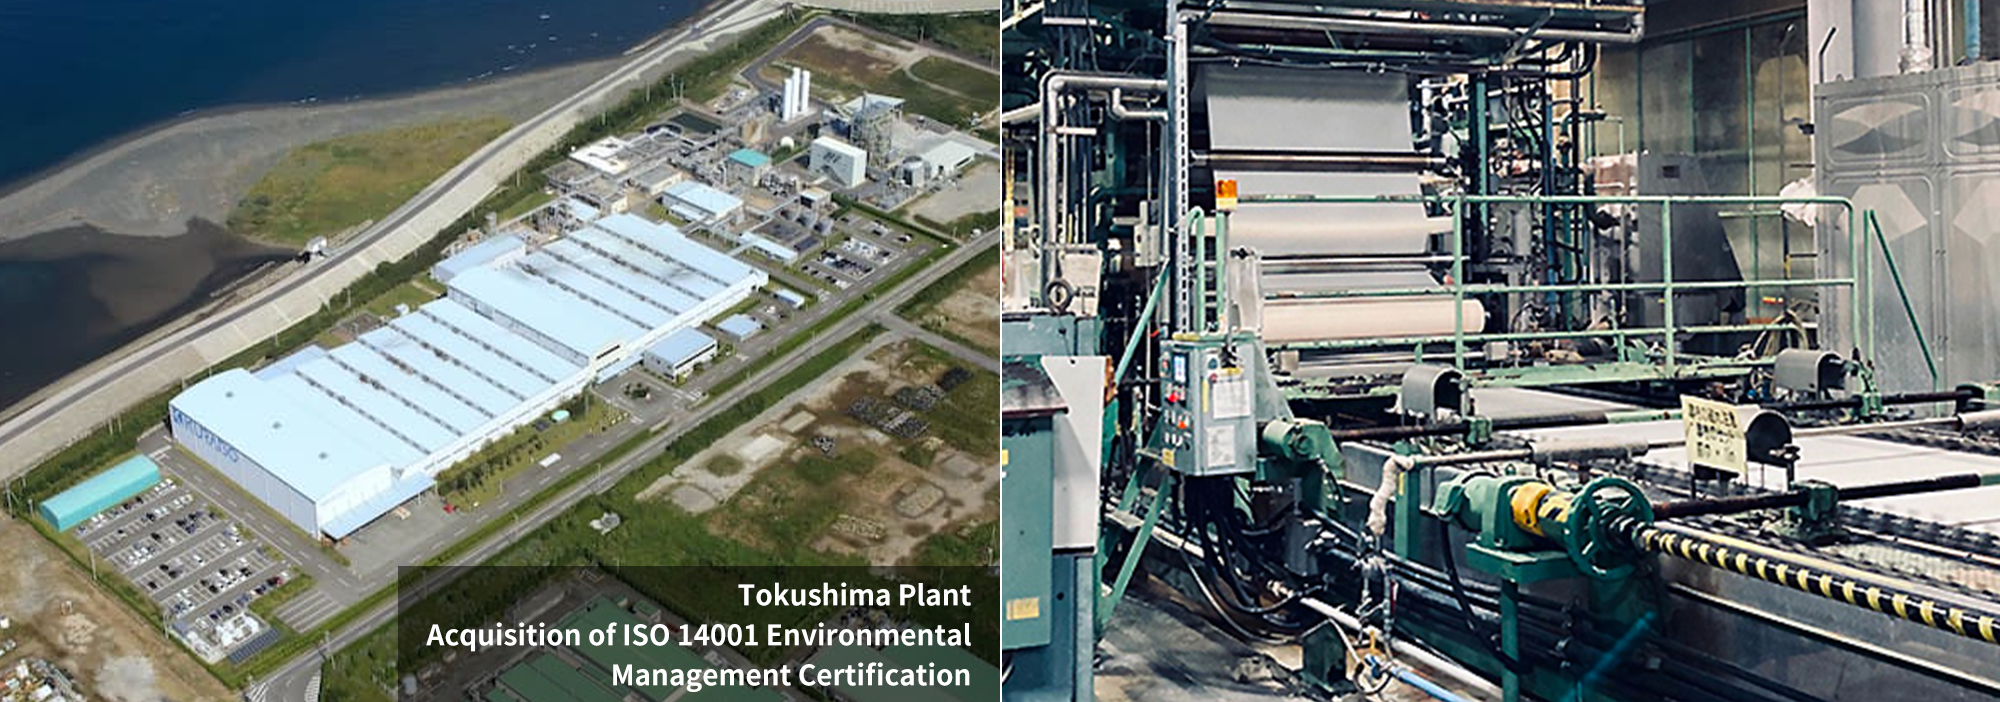 Tokushima Plant Acquisition of ISO 14001 Environmental Management Certification